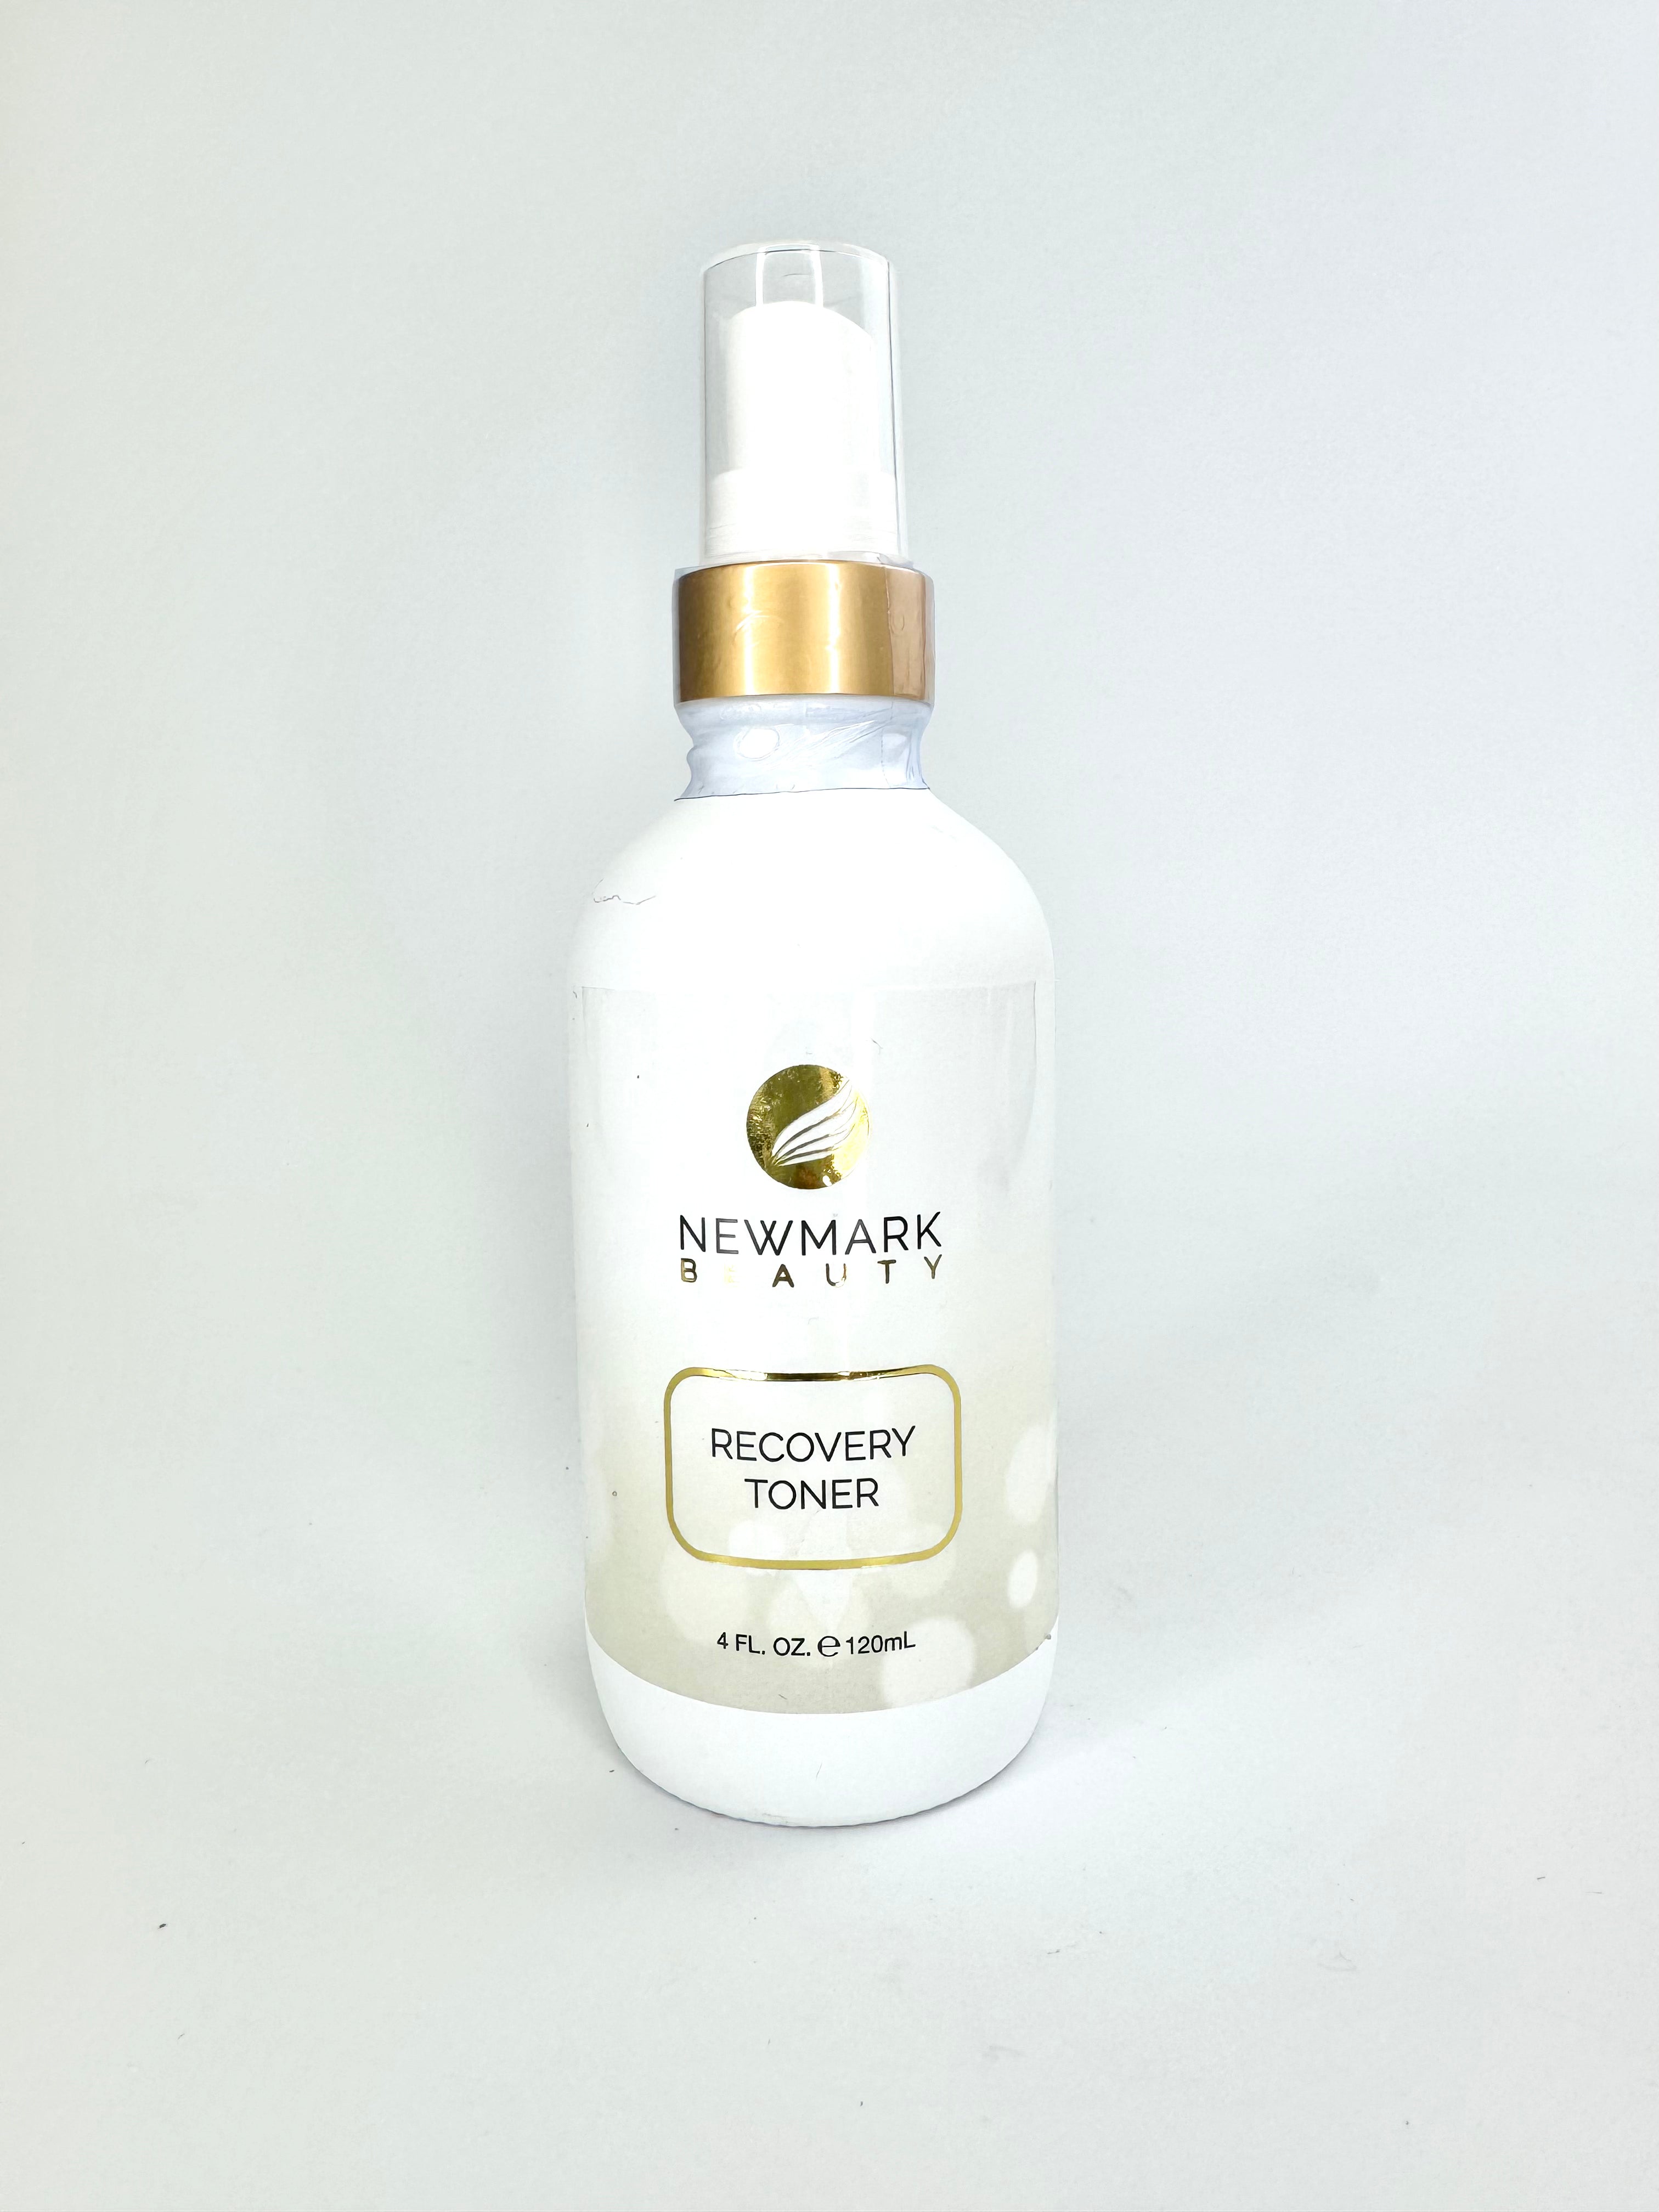 Recovery Toner by Newmark Beauty